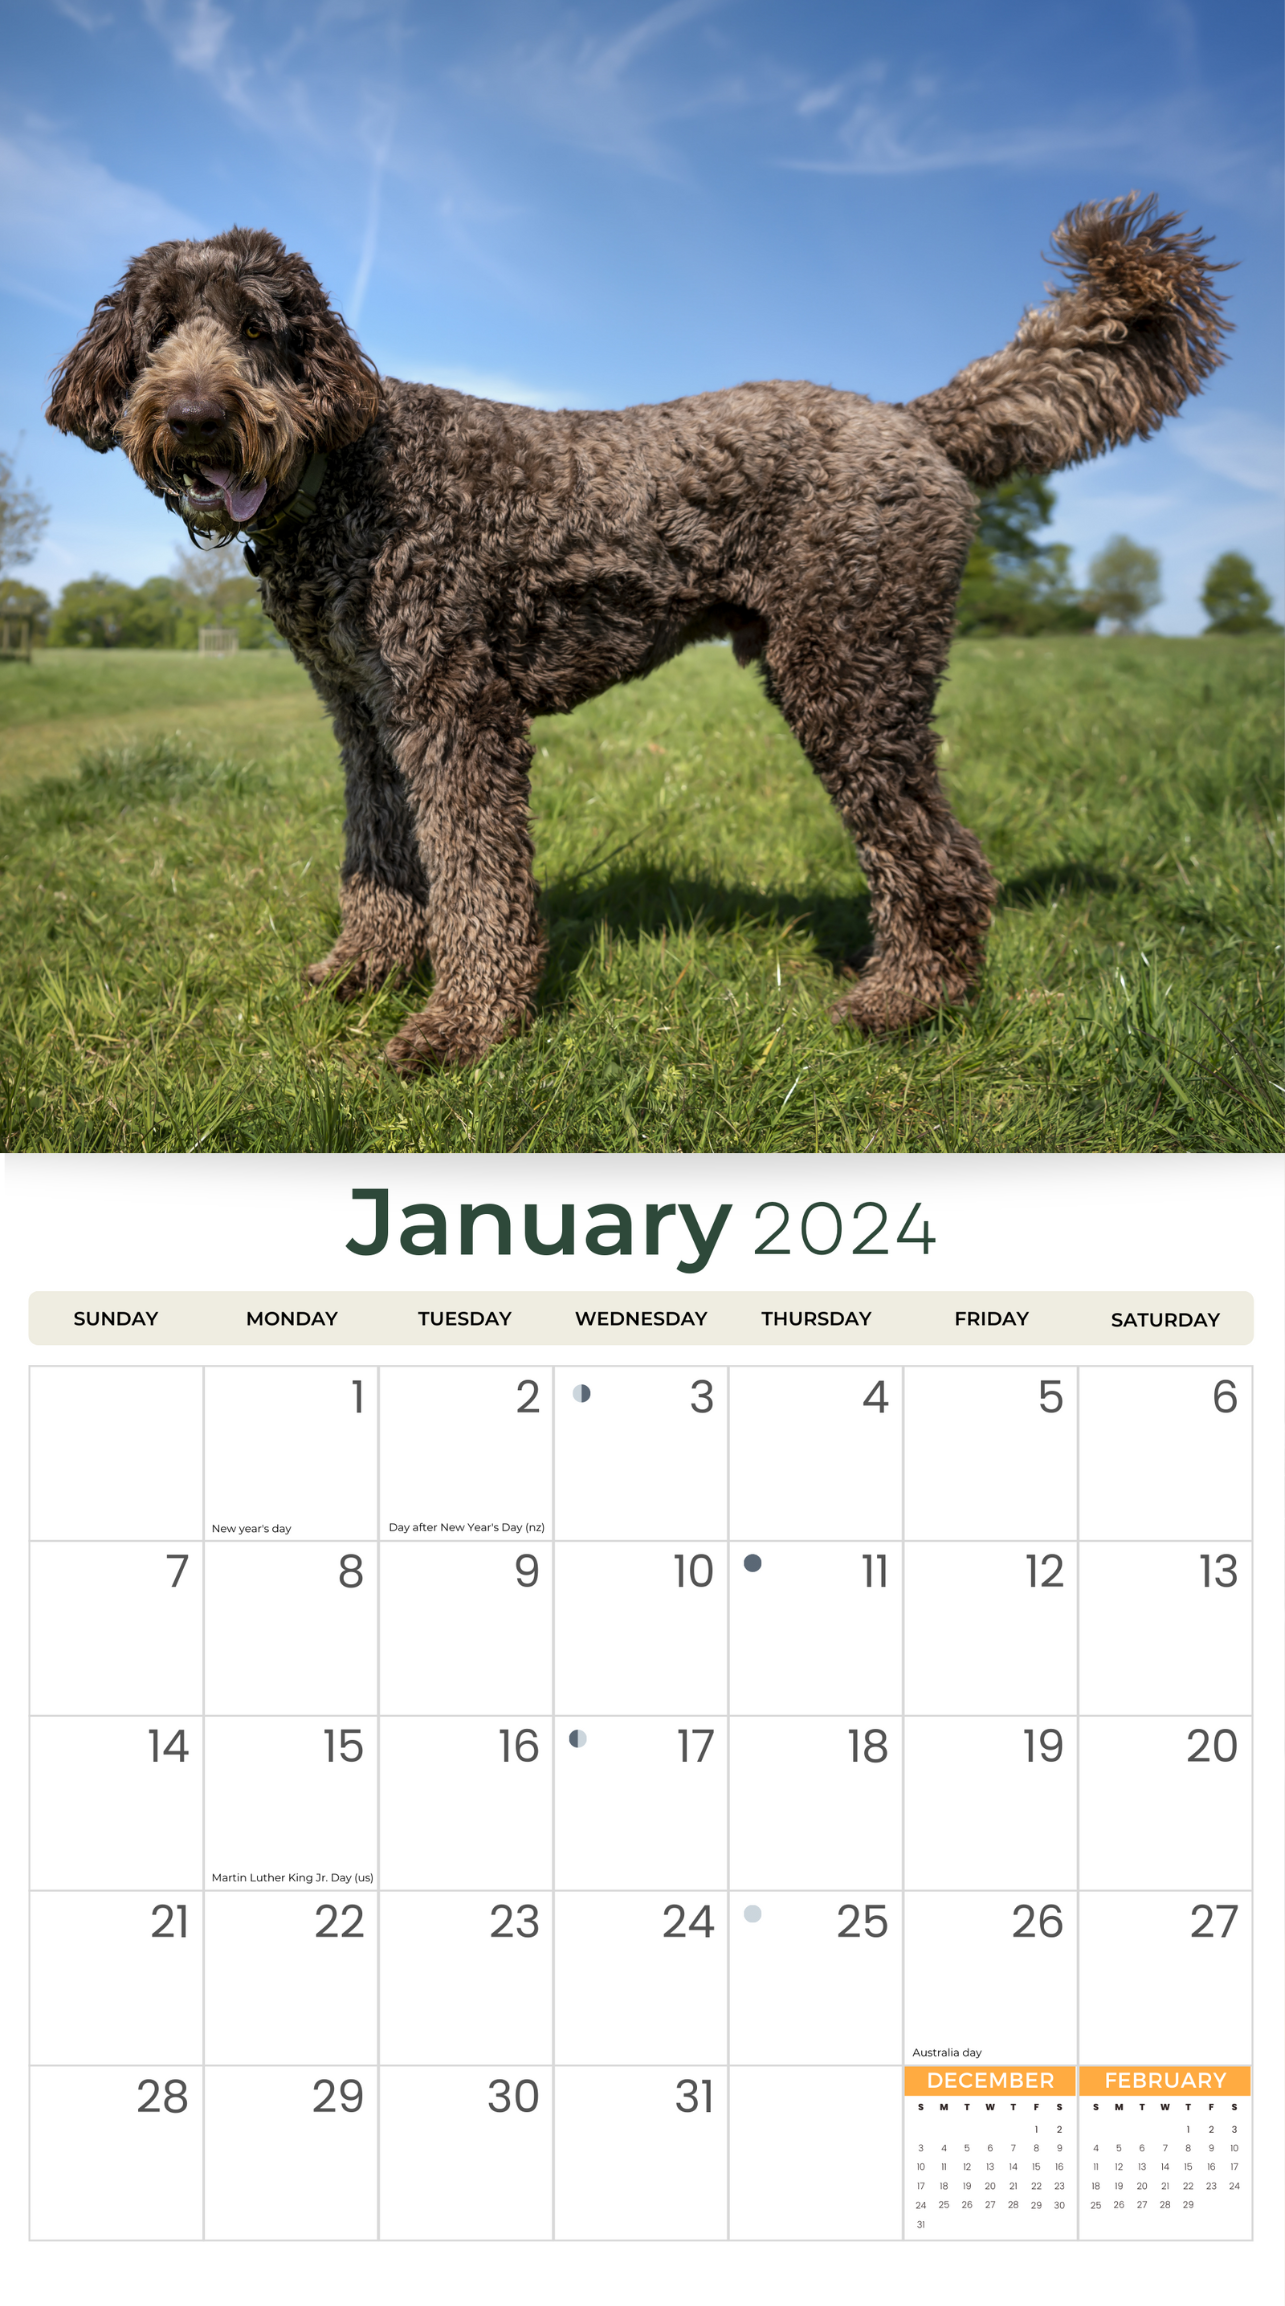 2024 Labradoodles Dogs & Puppies - Deluxe Wall Calendar by Just Calendars - 16 Month - Plastic Free